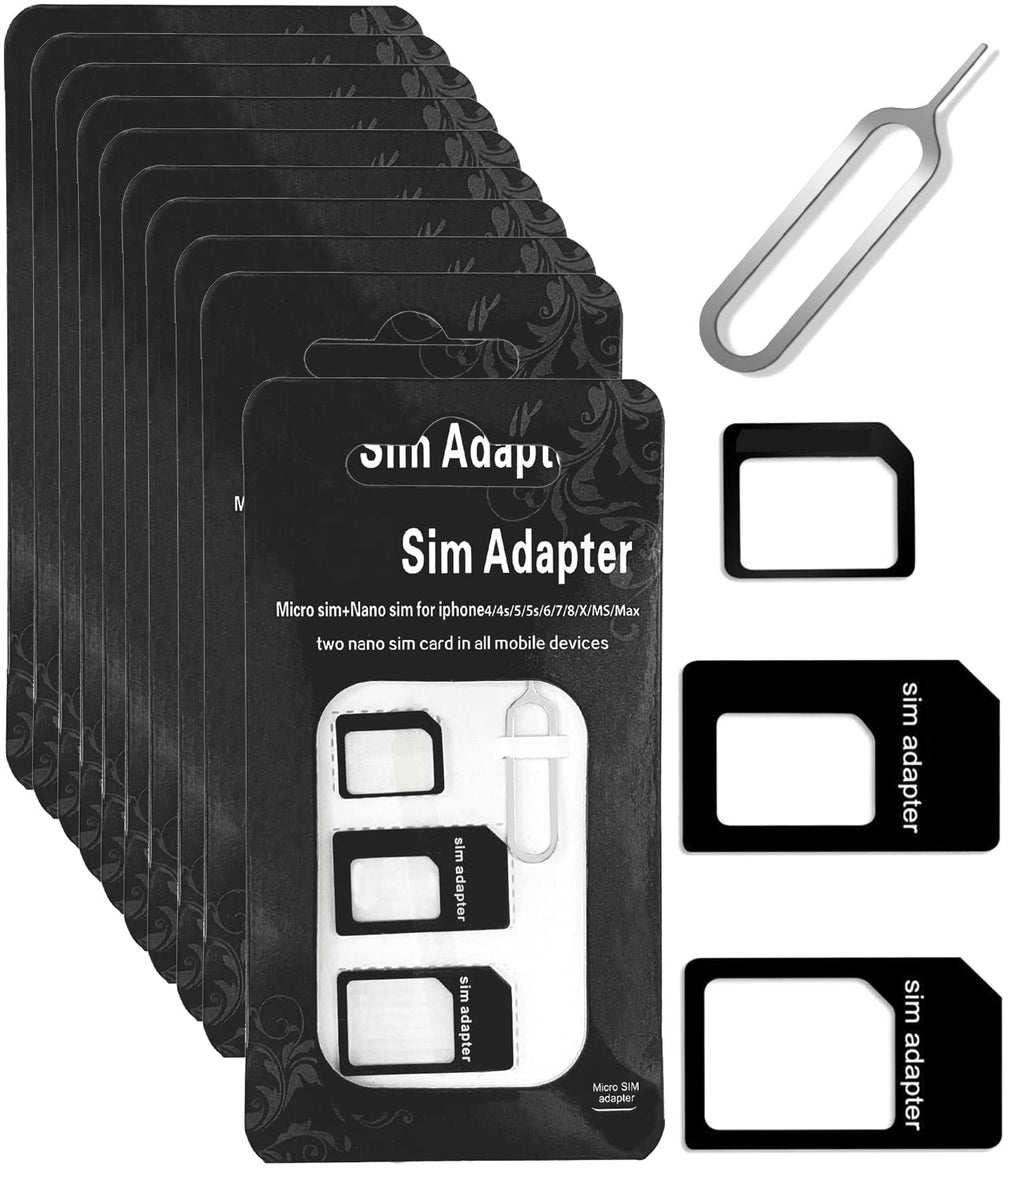  [AUSTRALIA] - 10 Sheets SIM Card Adapter Kit, 4 in 1 Nano Micro Standard Converter Kit Replacement with SIM Tray Eject Removal Tool Steel Ejector Pin 1, Black,Compatible with iPhone iPad Samsung Galaxy HTC Nokia